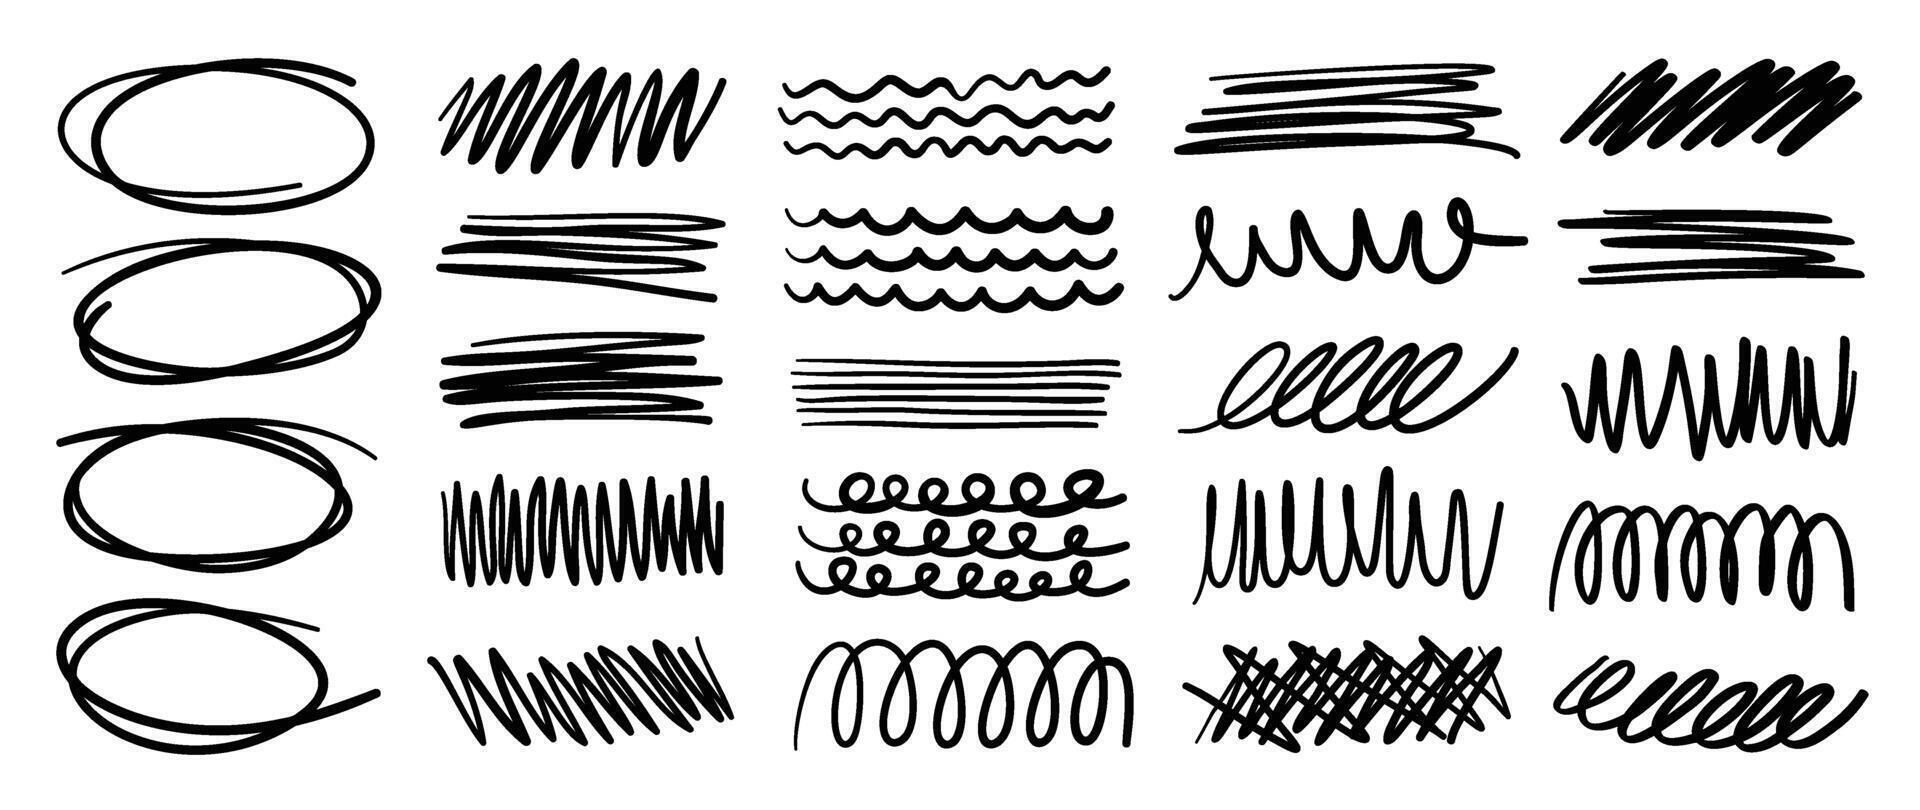 Set of scribble doodle element . Hand drawn doodle style collection of speech bubble, scribble, marker, highlight. Design for print, cartoon, card, decoration, sticker. vector